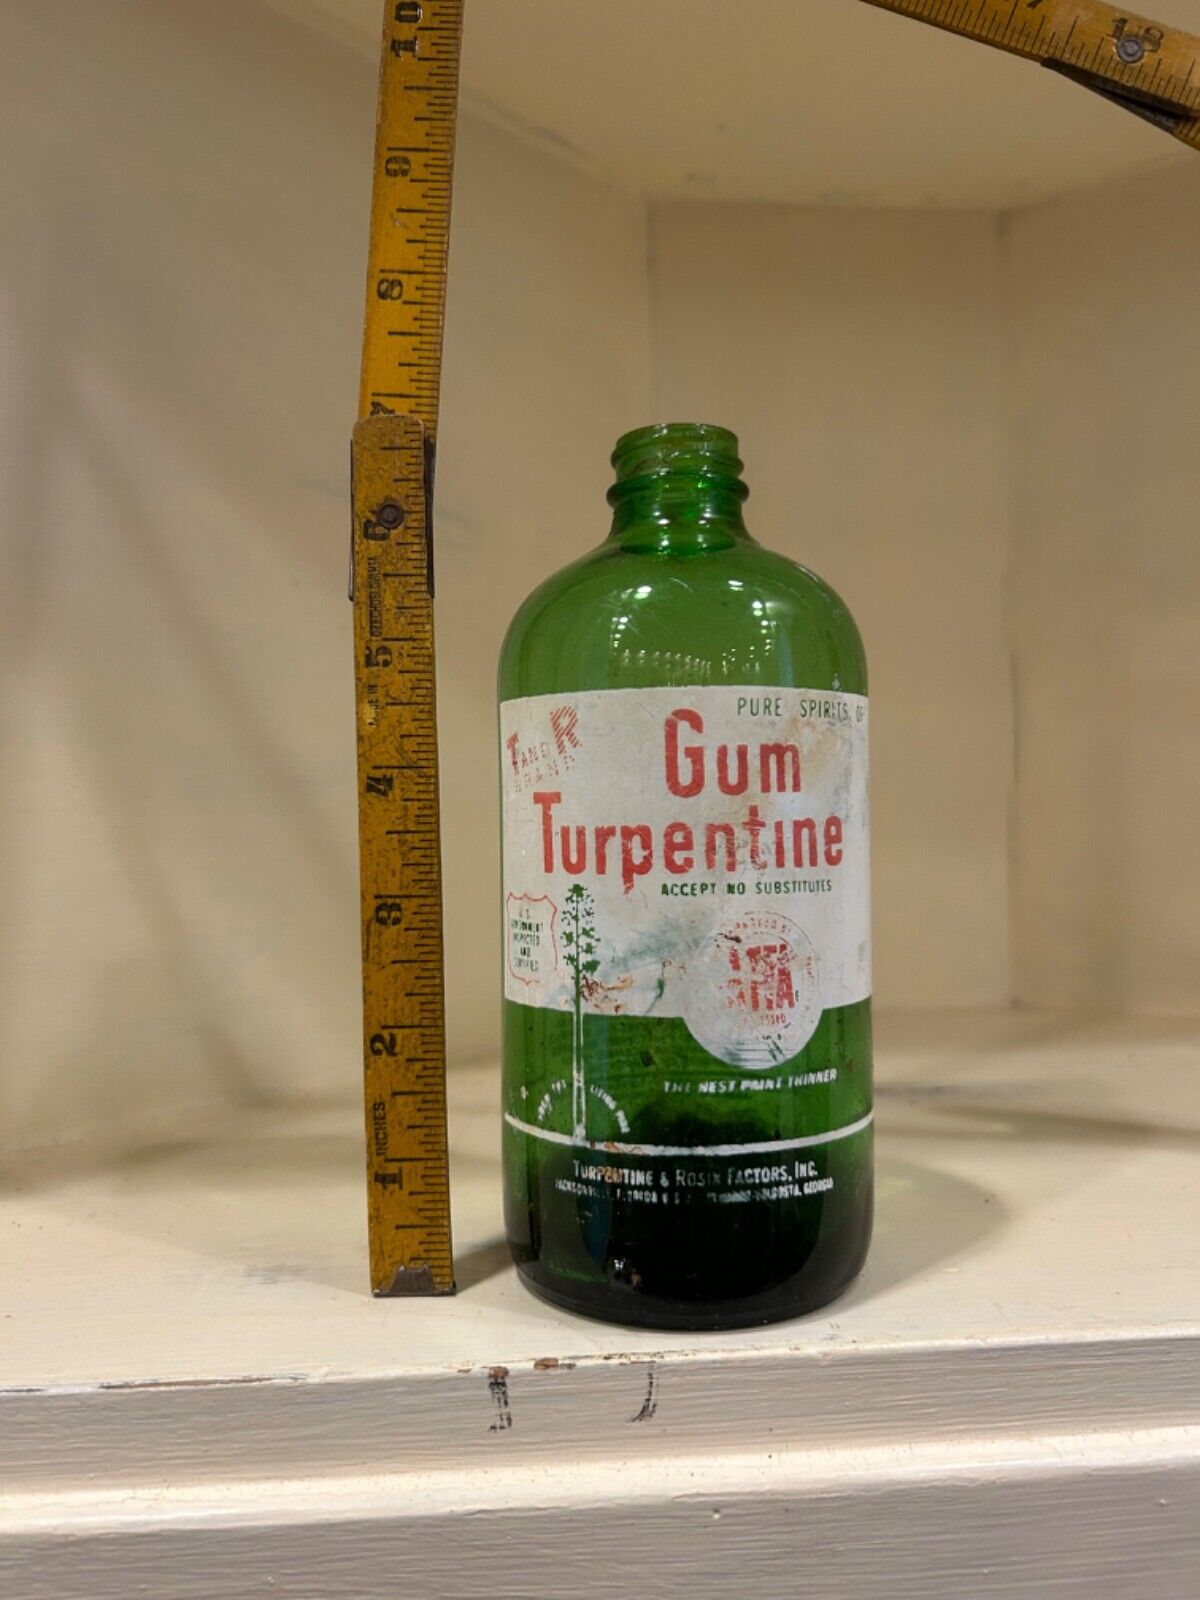 T and R brand 1939 Gum Turpentine Green glass bottle